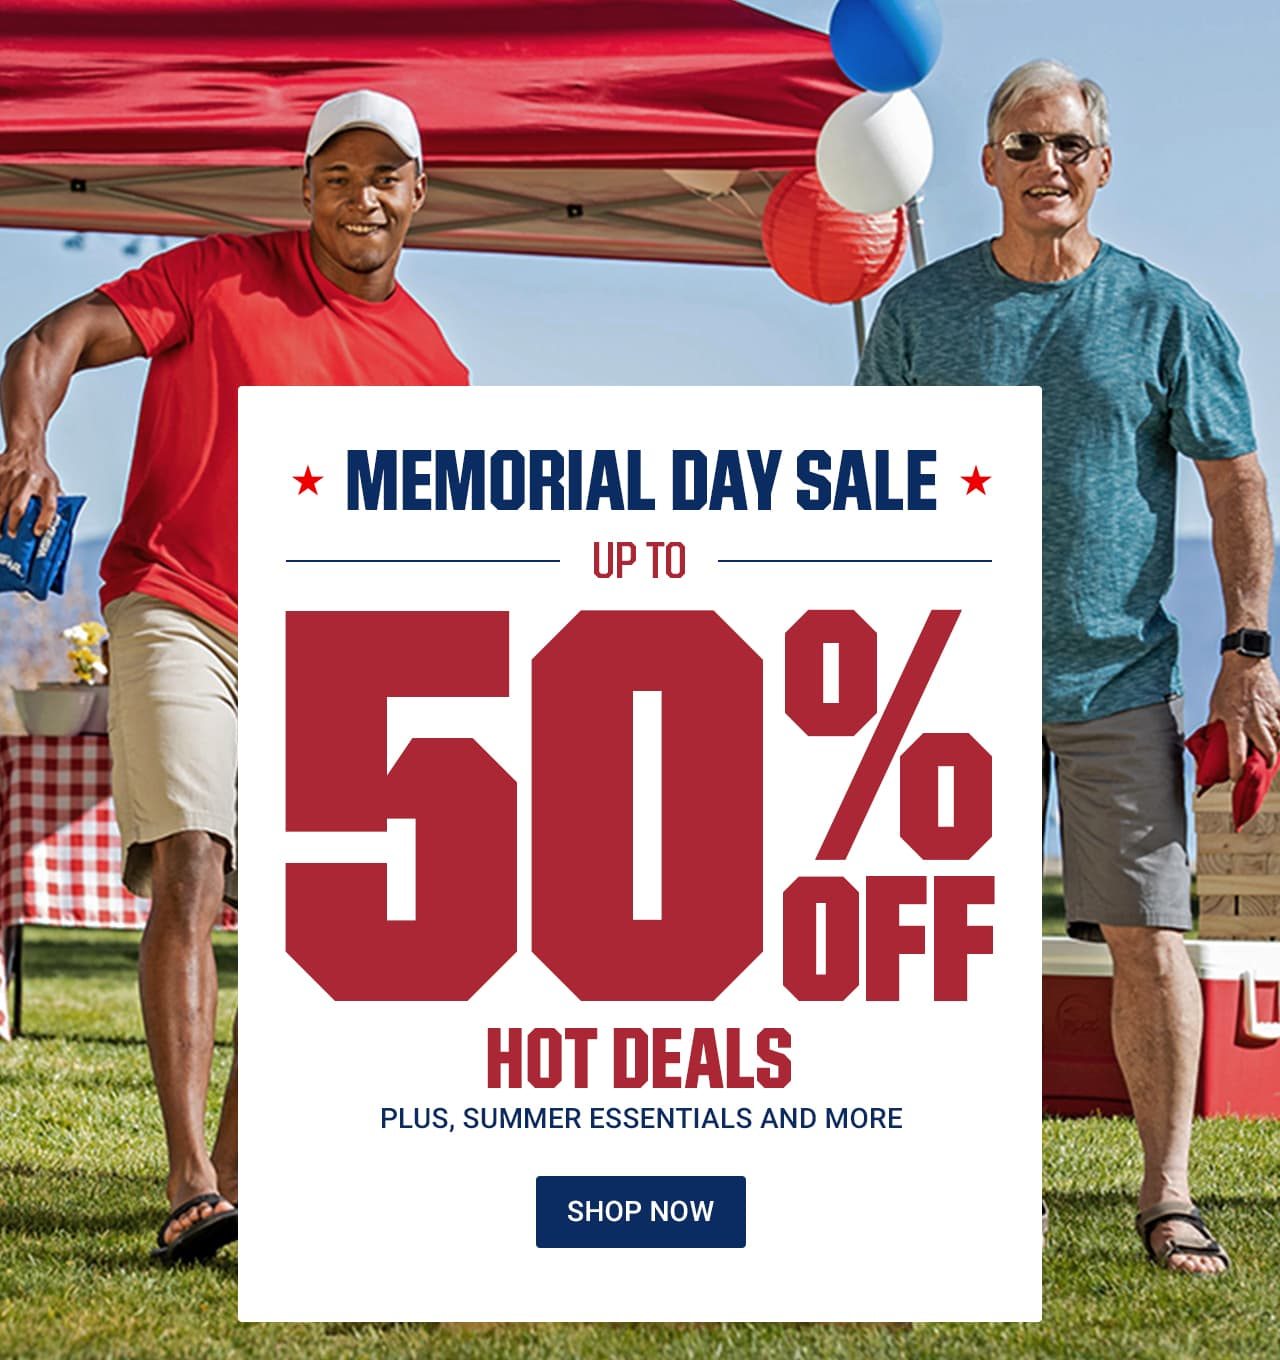 MEMORIAL DAY SALE | UP TO 50% OFF HOT DEALS PLUS SUMMER ESSENTIALS AND MORE | SHOP NOW >